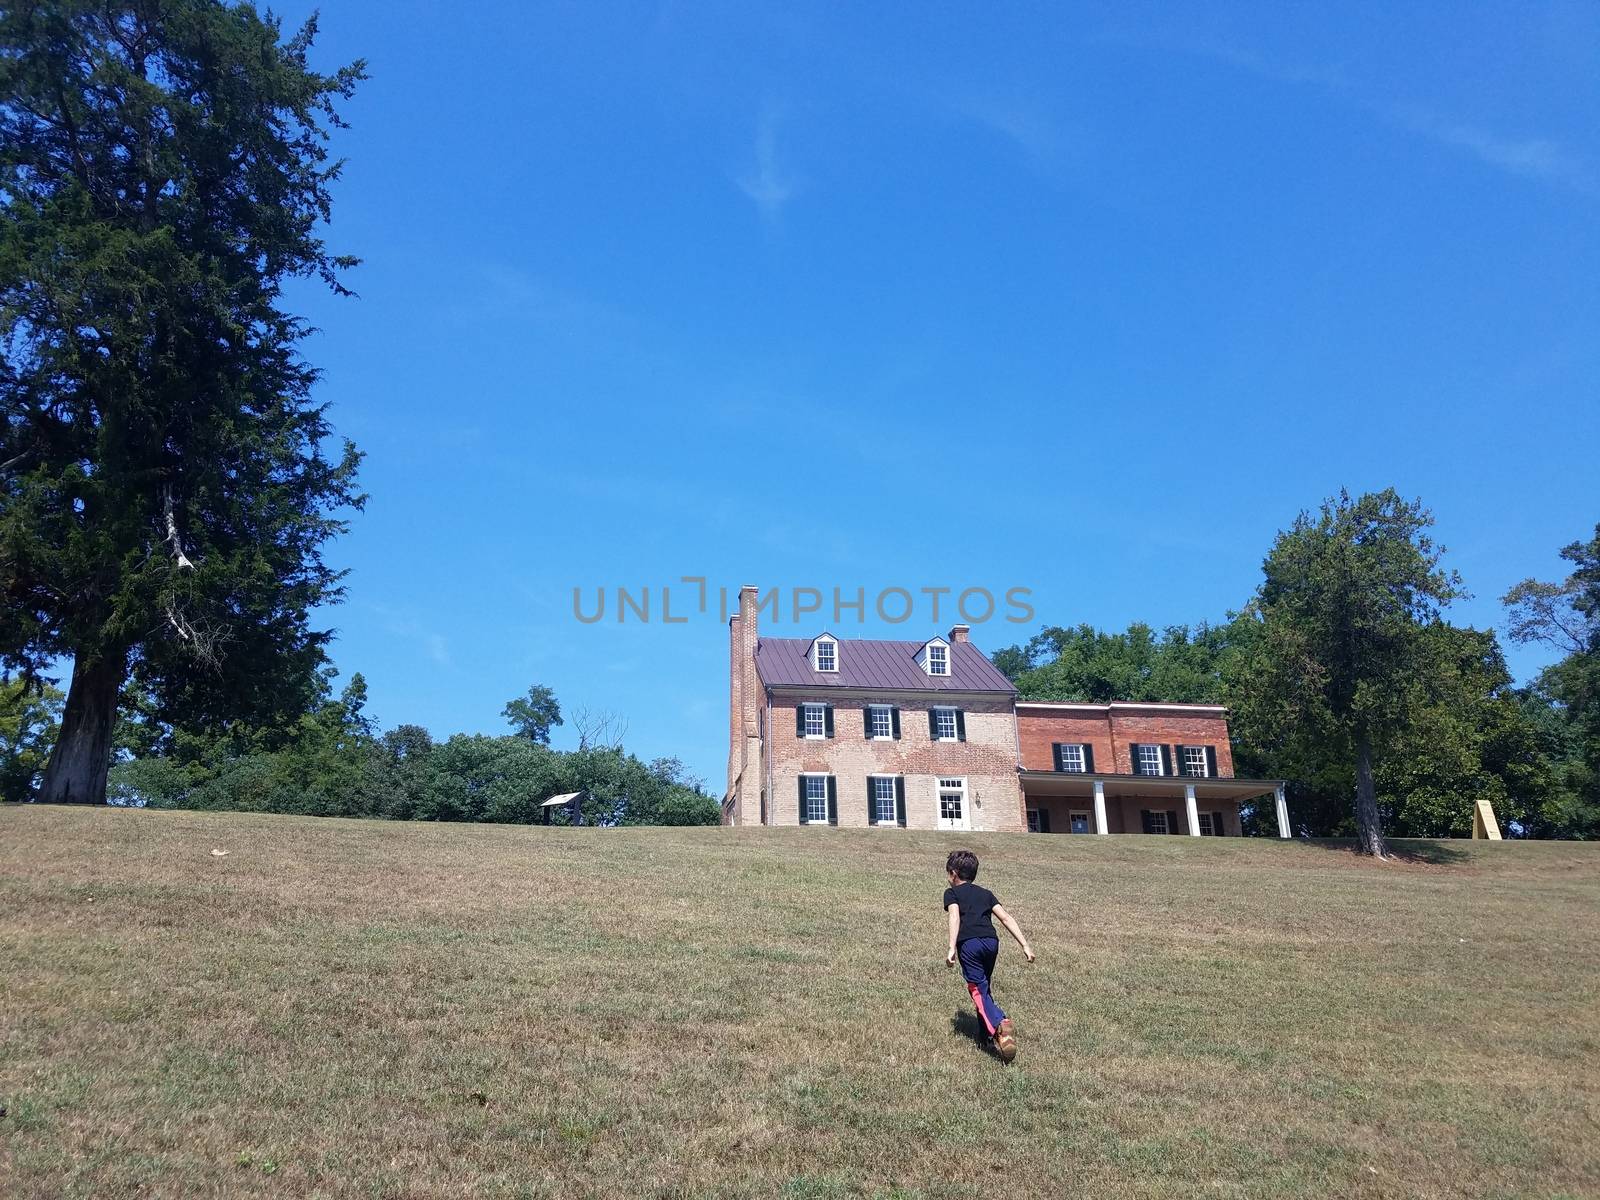 boy child running up hill or grass with building